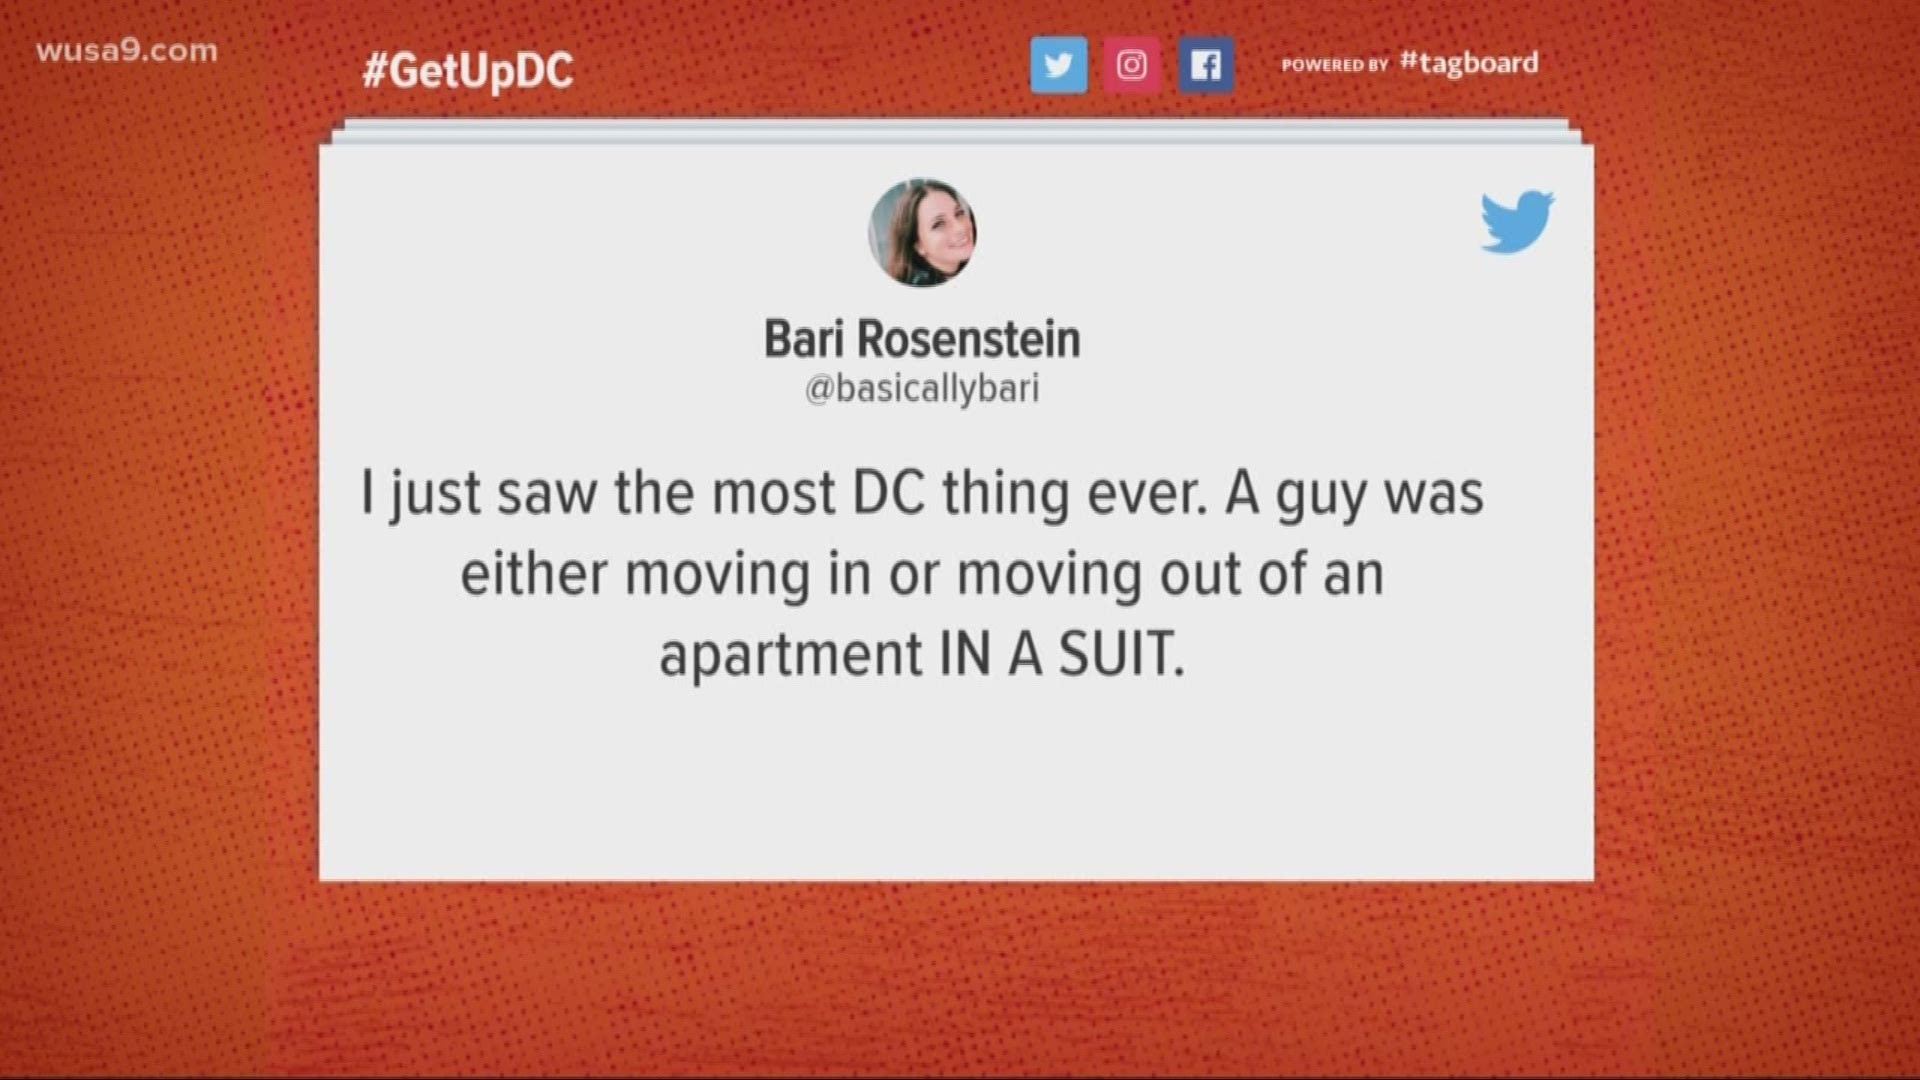 A man was spotted wearing a suit moving in or out of an apartment building in D.C. Hey you never know who you will meet on these D.C. streets!